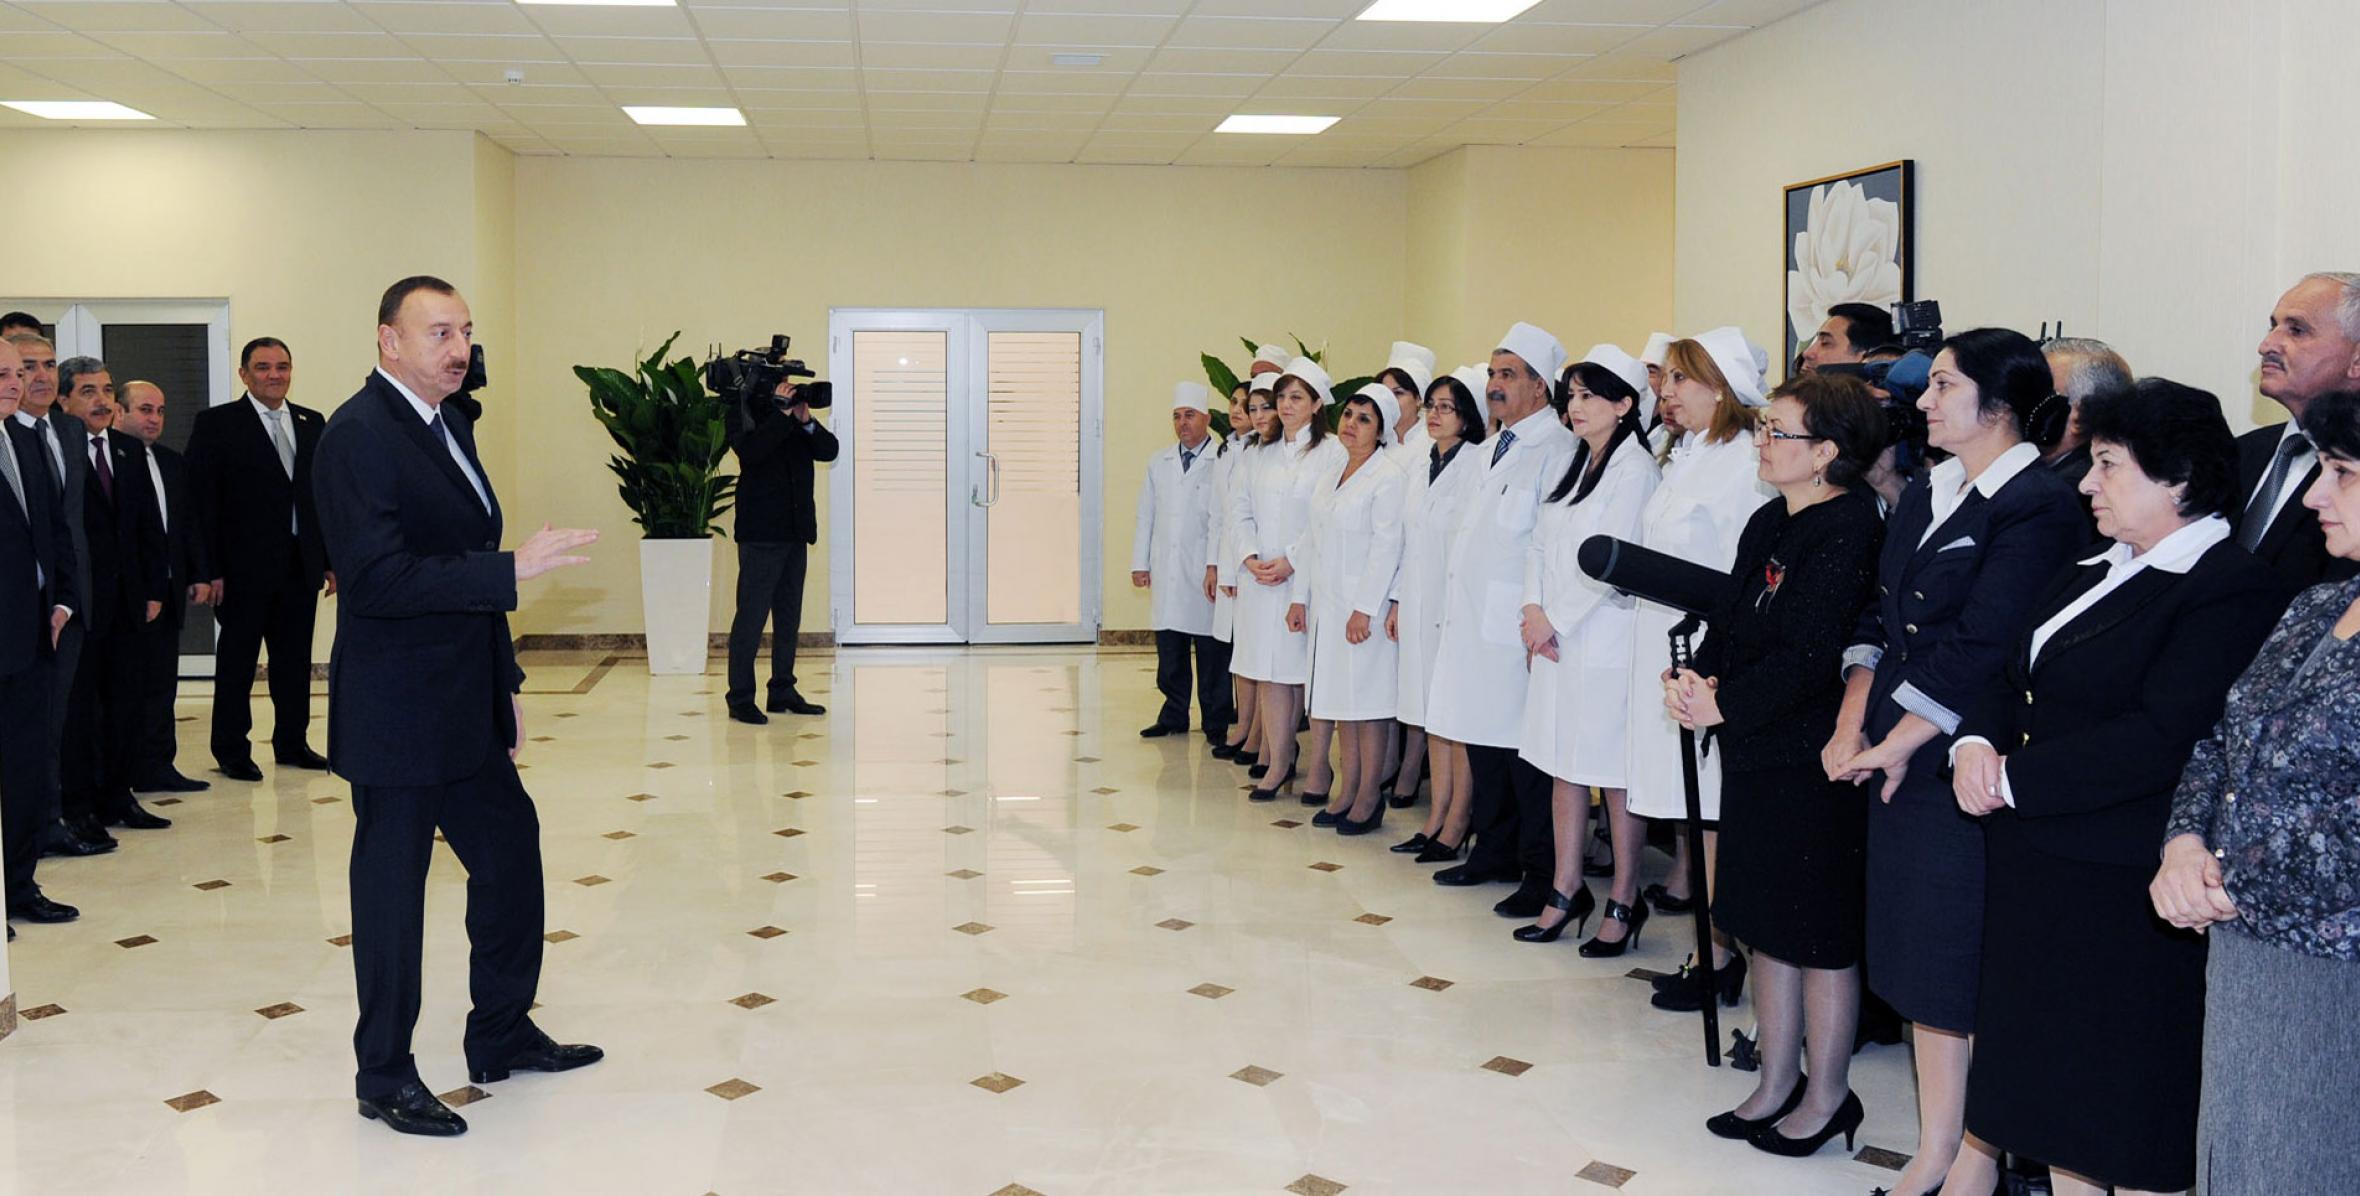 Speech by Ilham Aliyev at the opening of the Agdash central district hospital